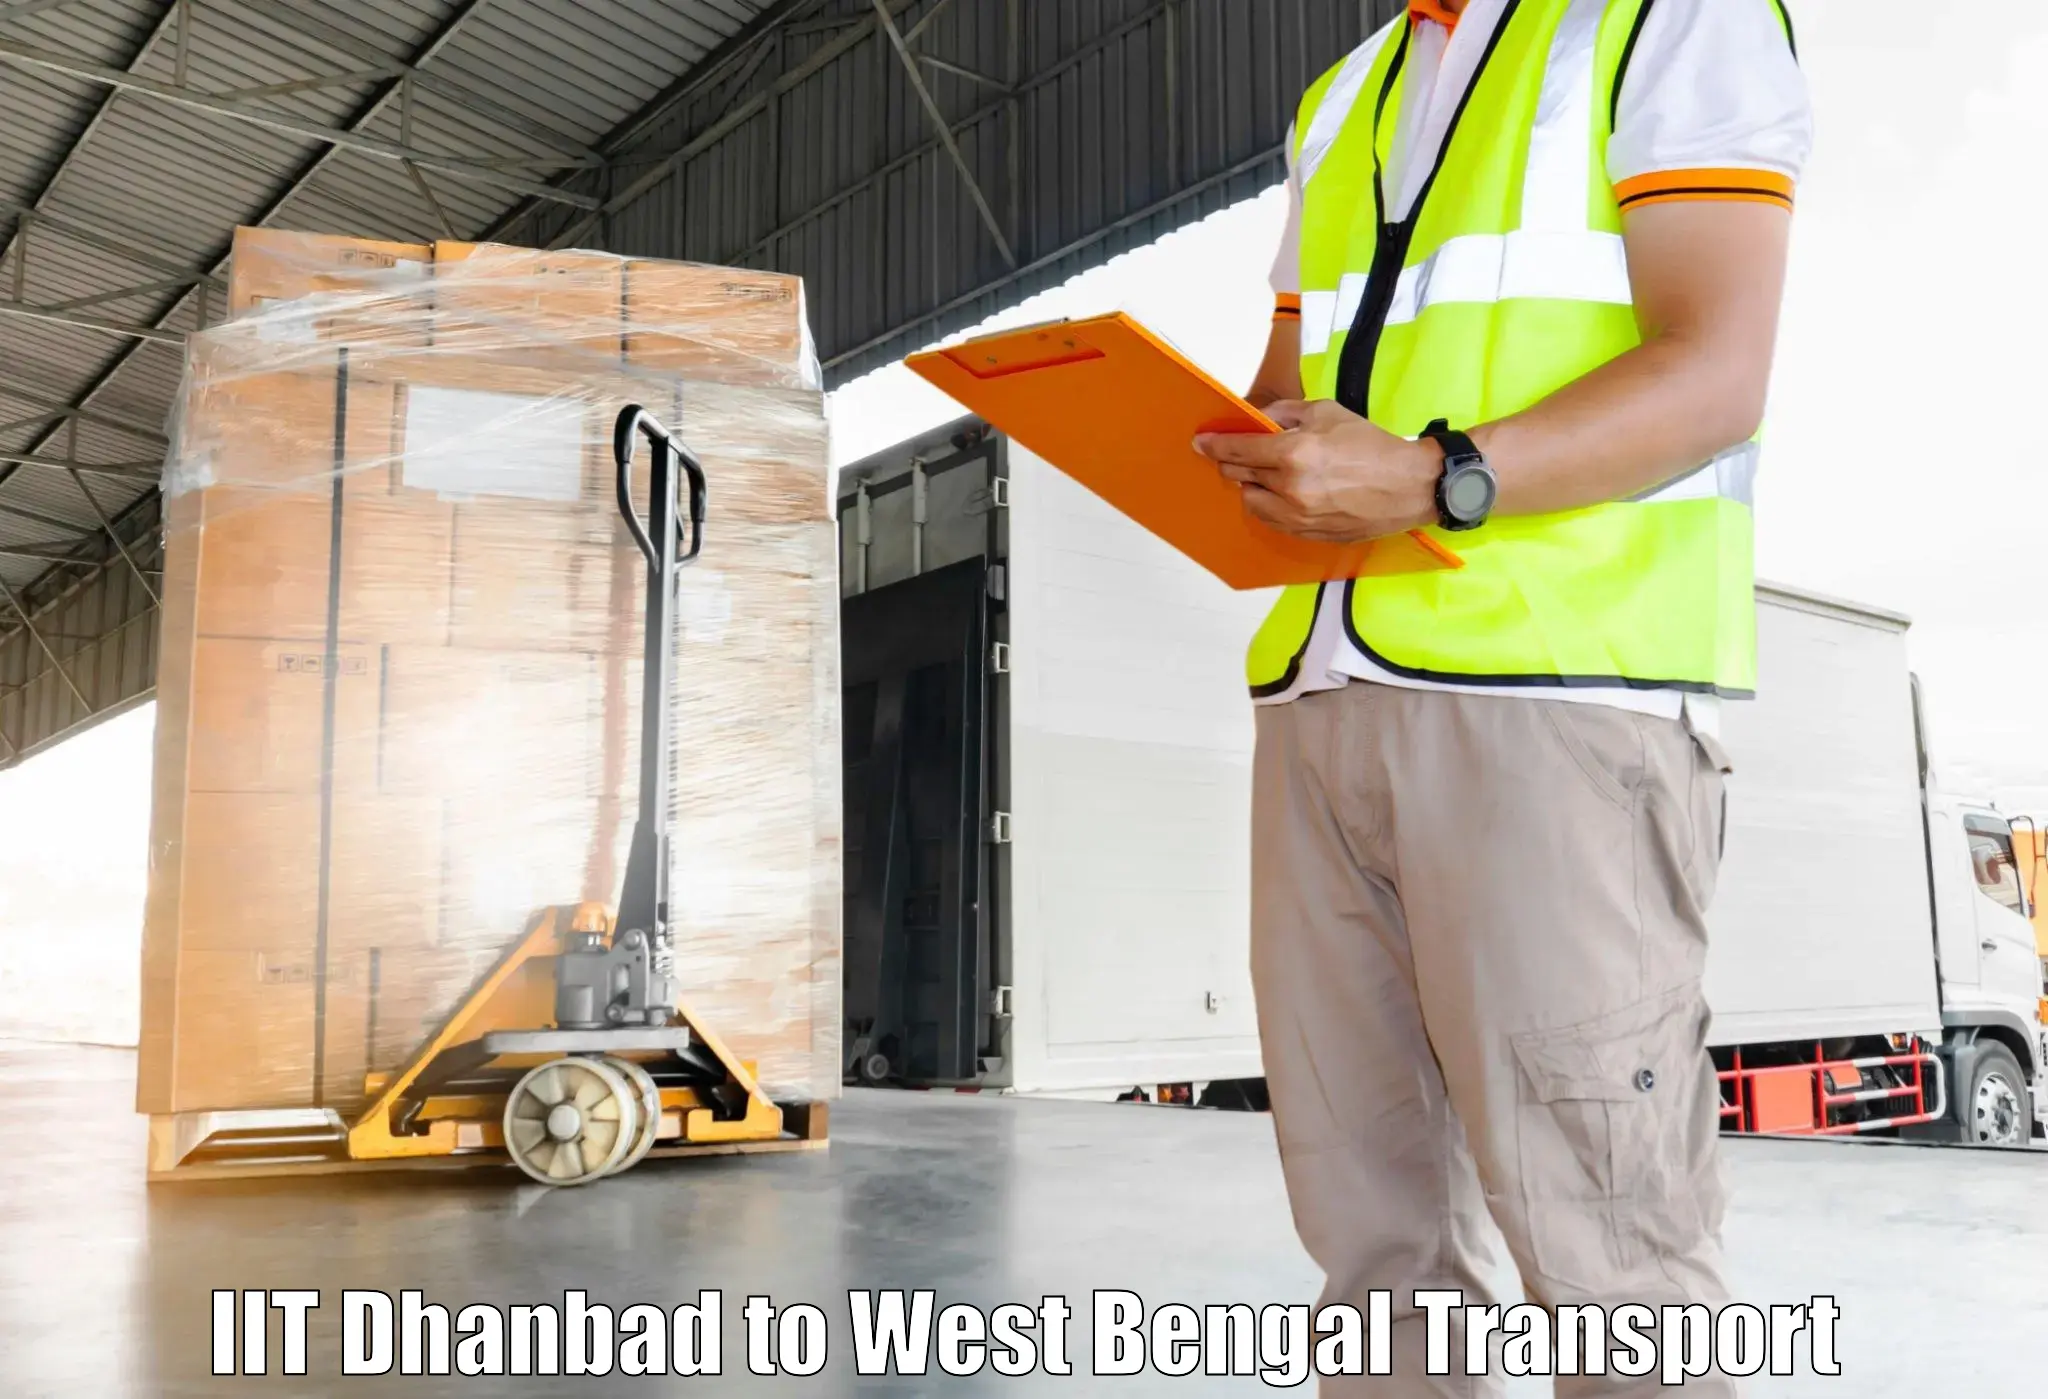 Air freight transport services IIT Dhanbad to Barasat